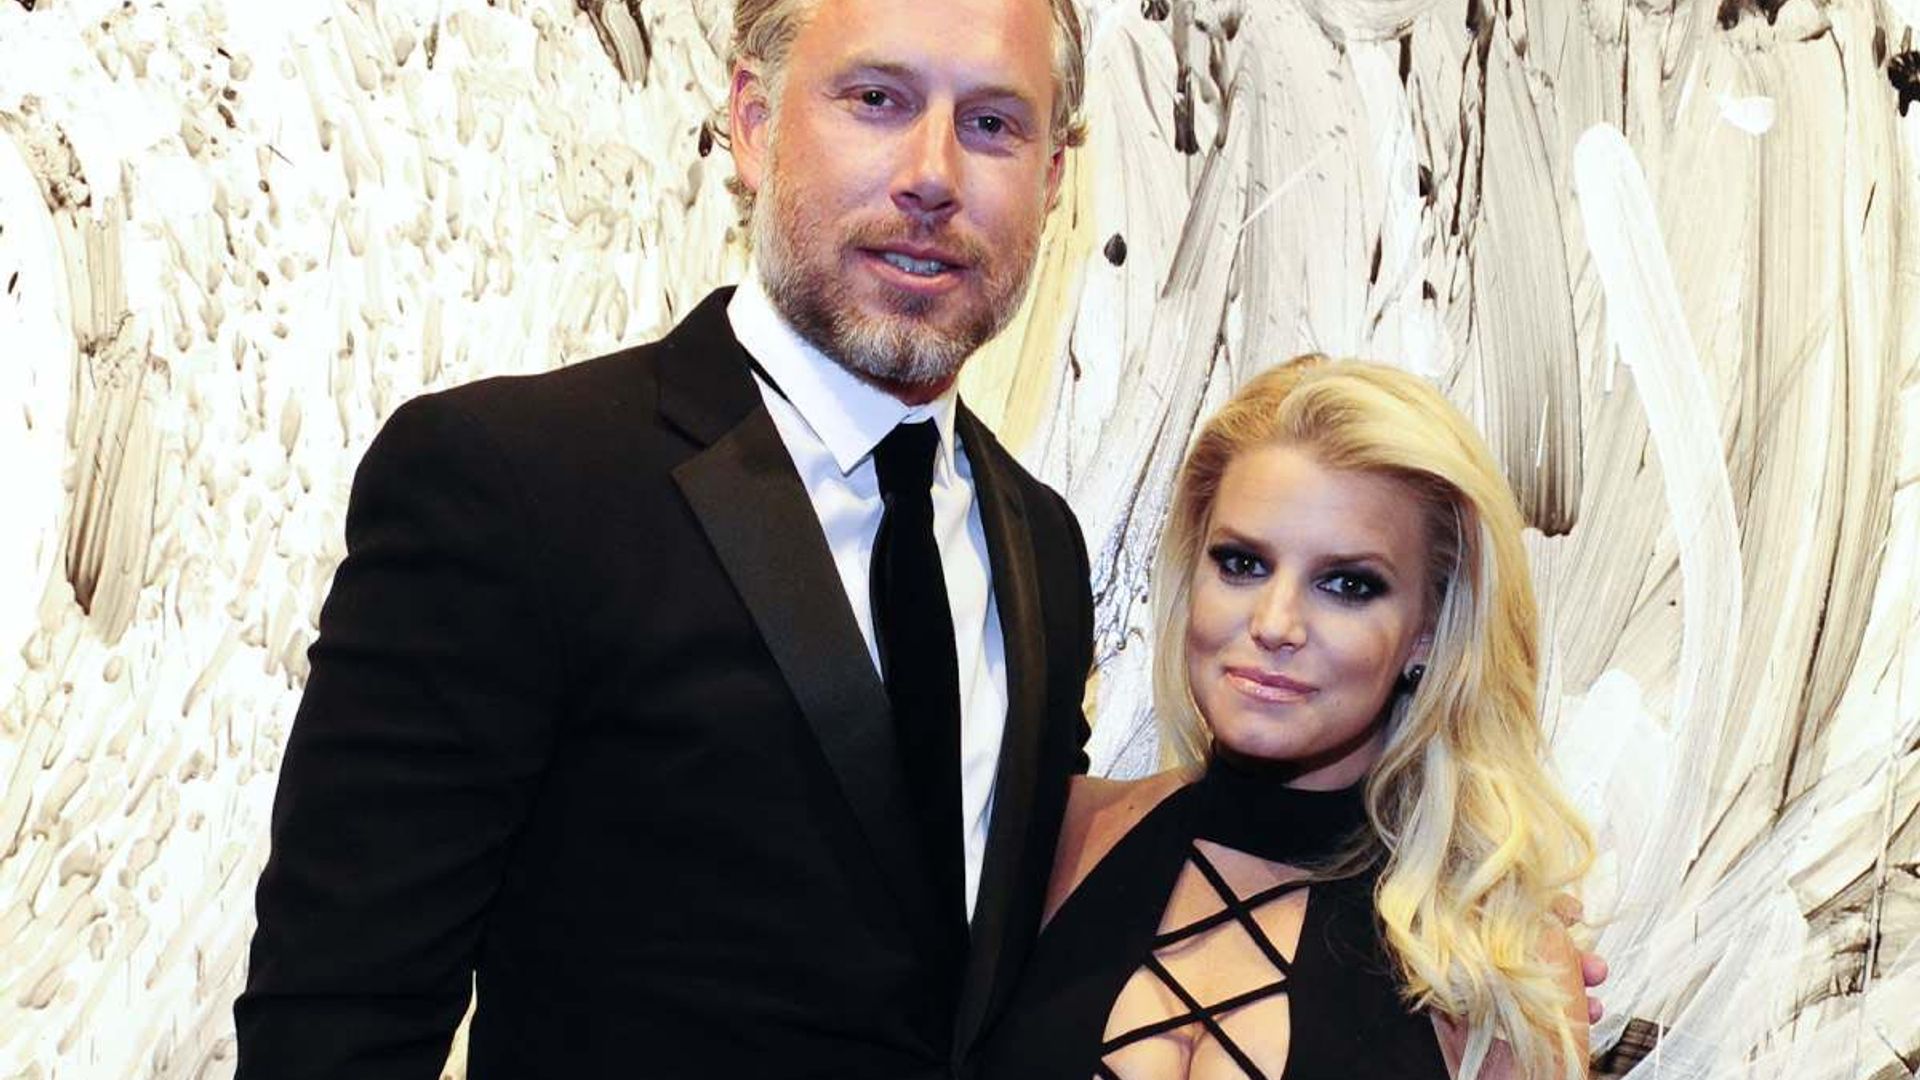 Jessica Simpson's husband shares intimate message with photos - and fans are confused